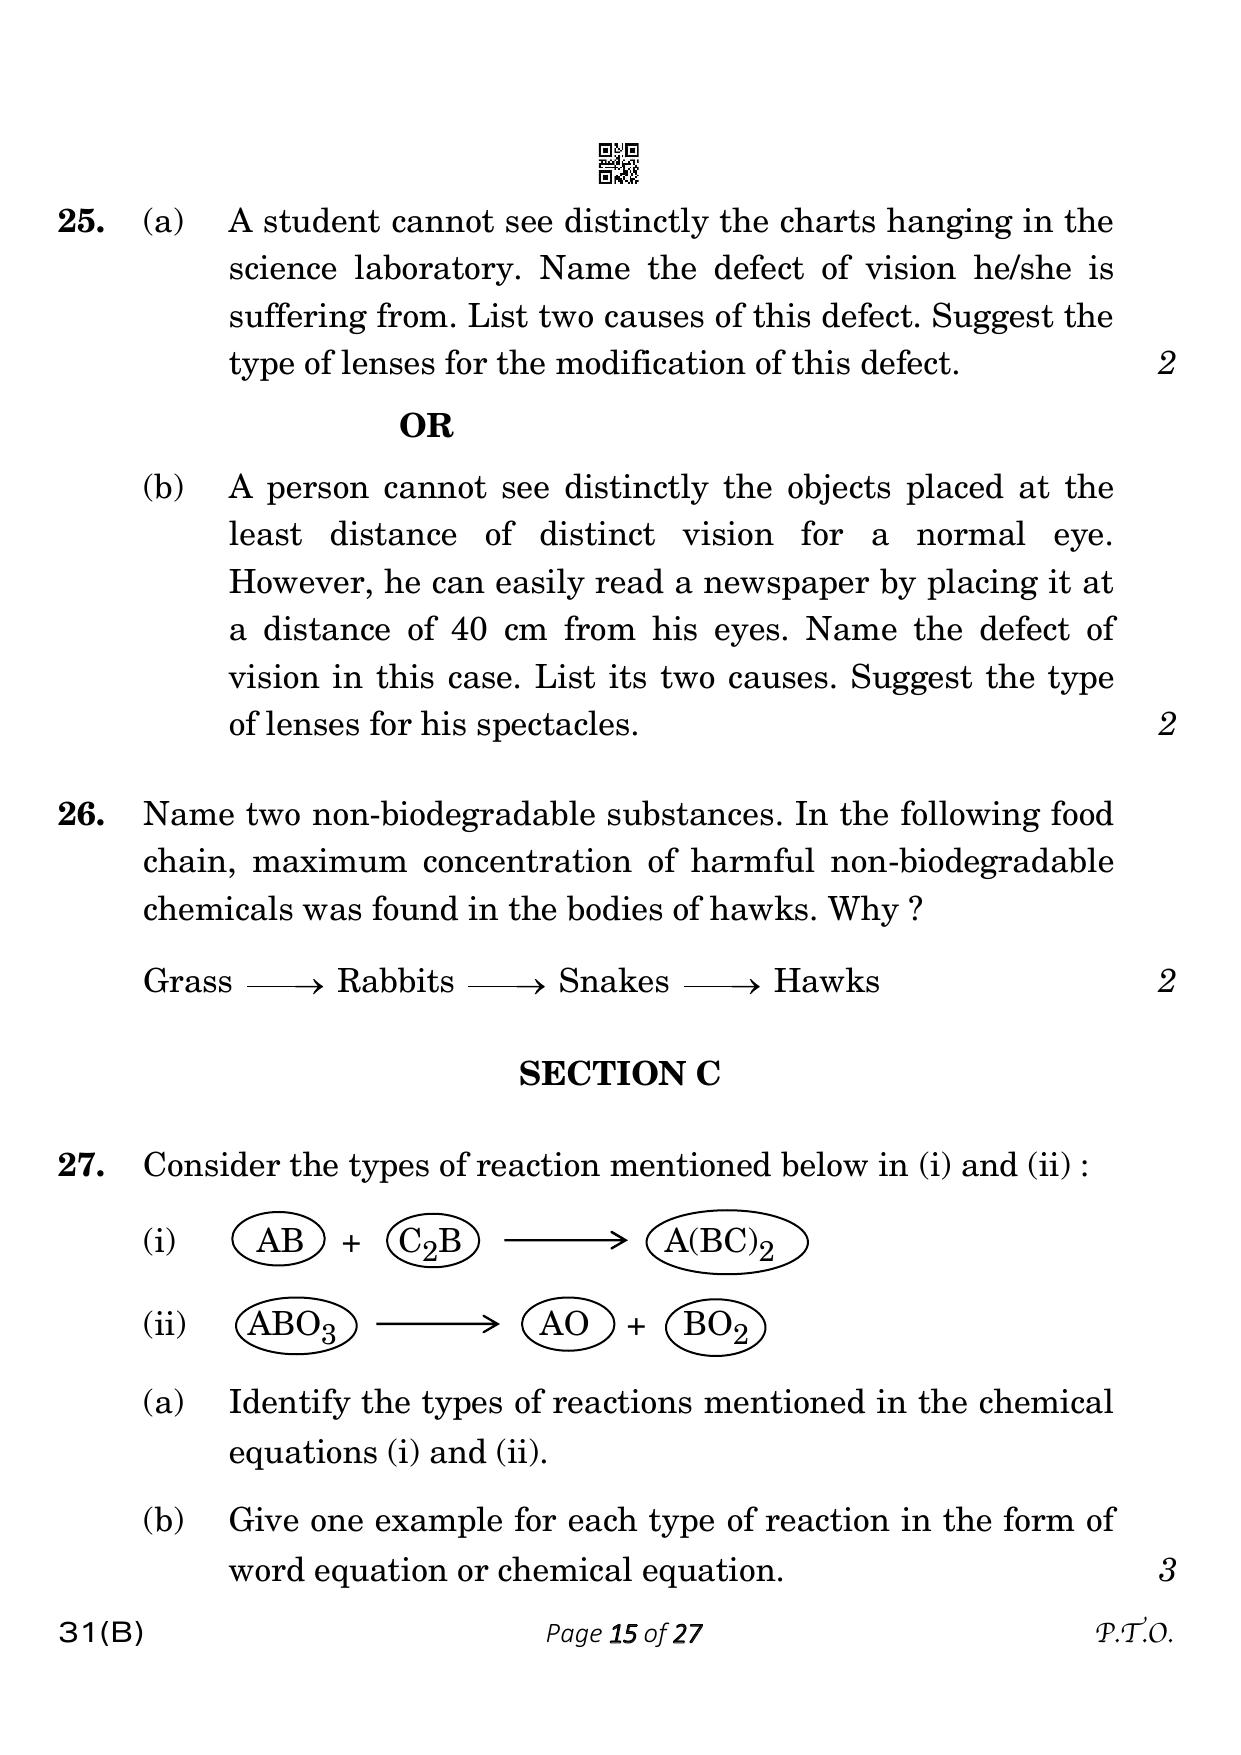 CBSE Class 10 31-B Science 2023 (Compartment) Question Paper - Page 15